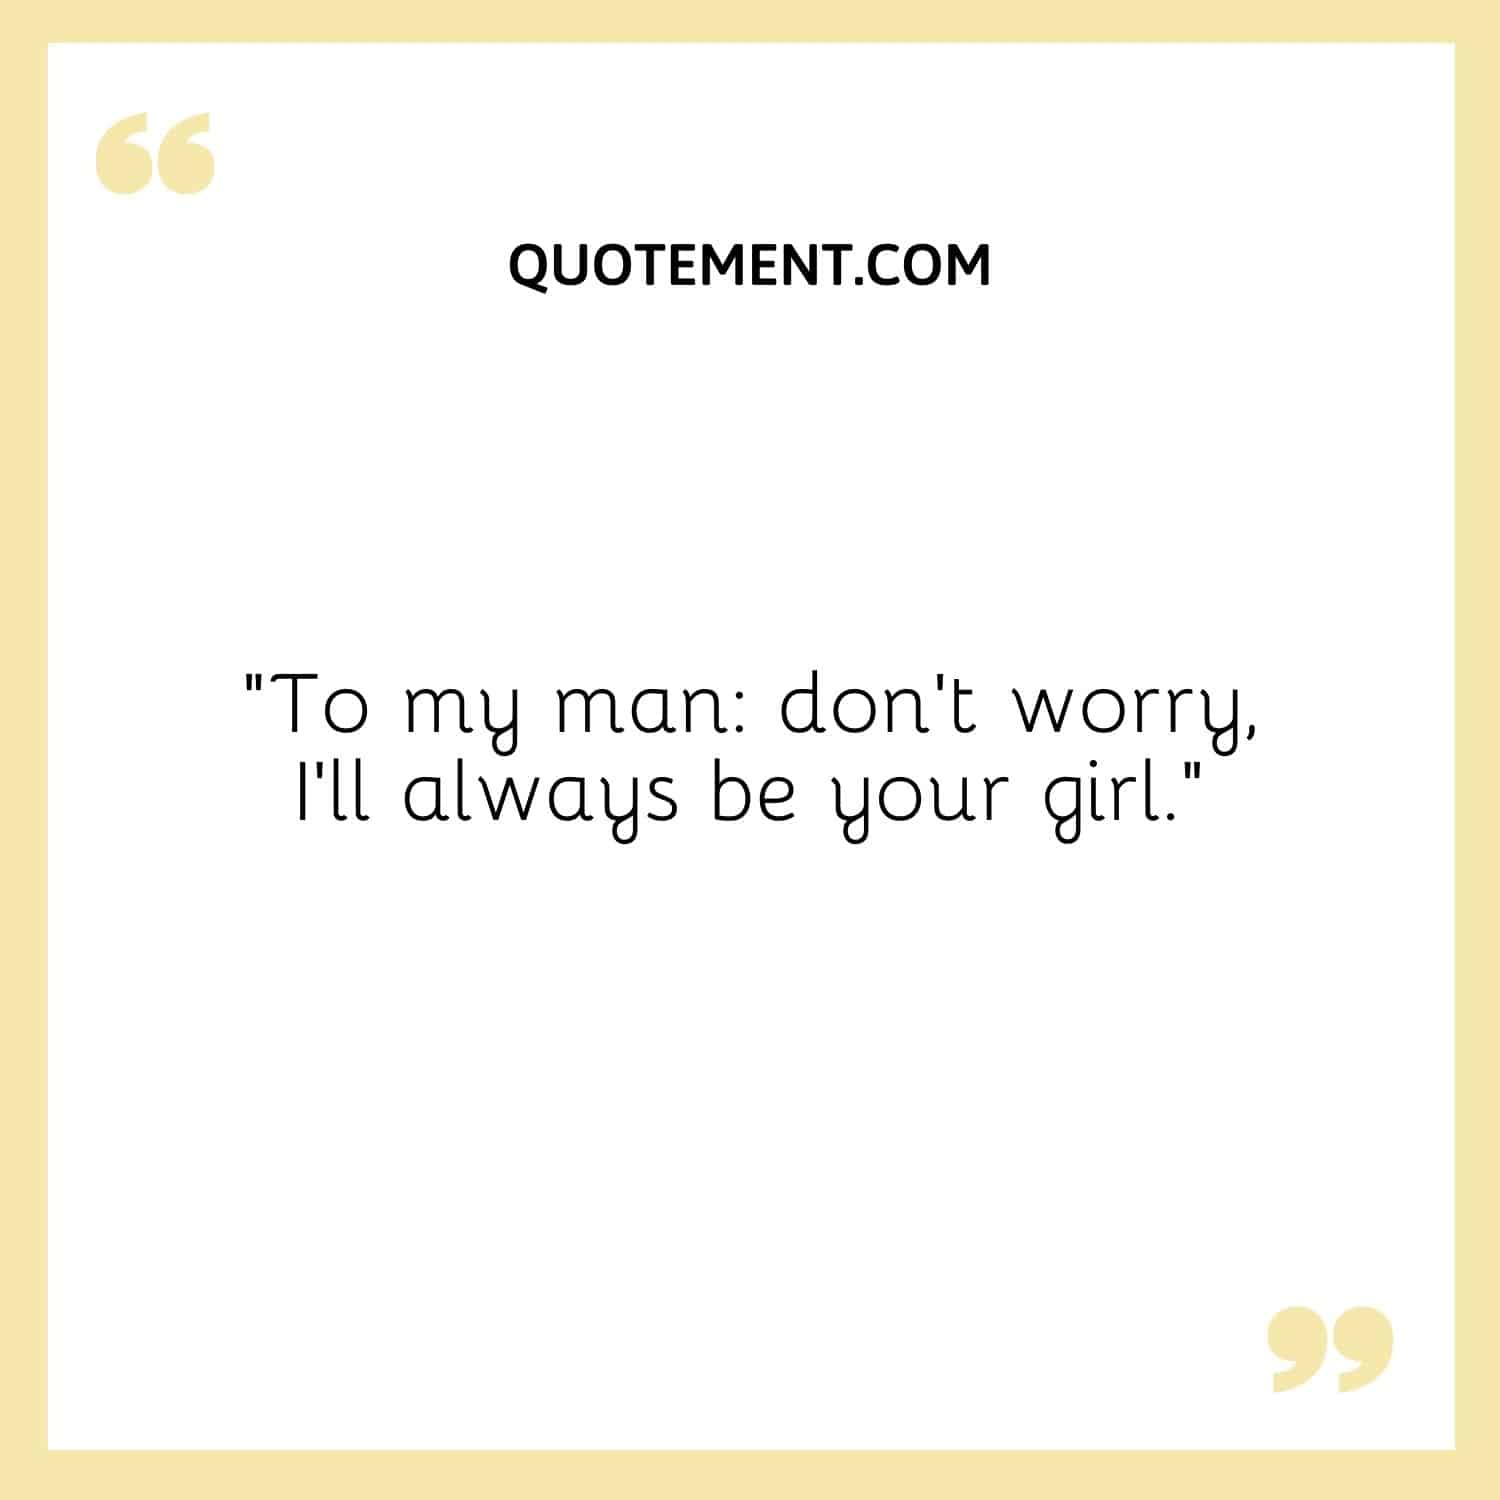 To my man don't worry, I'll always be your girl.